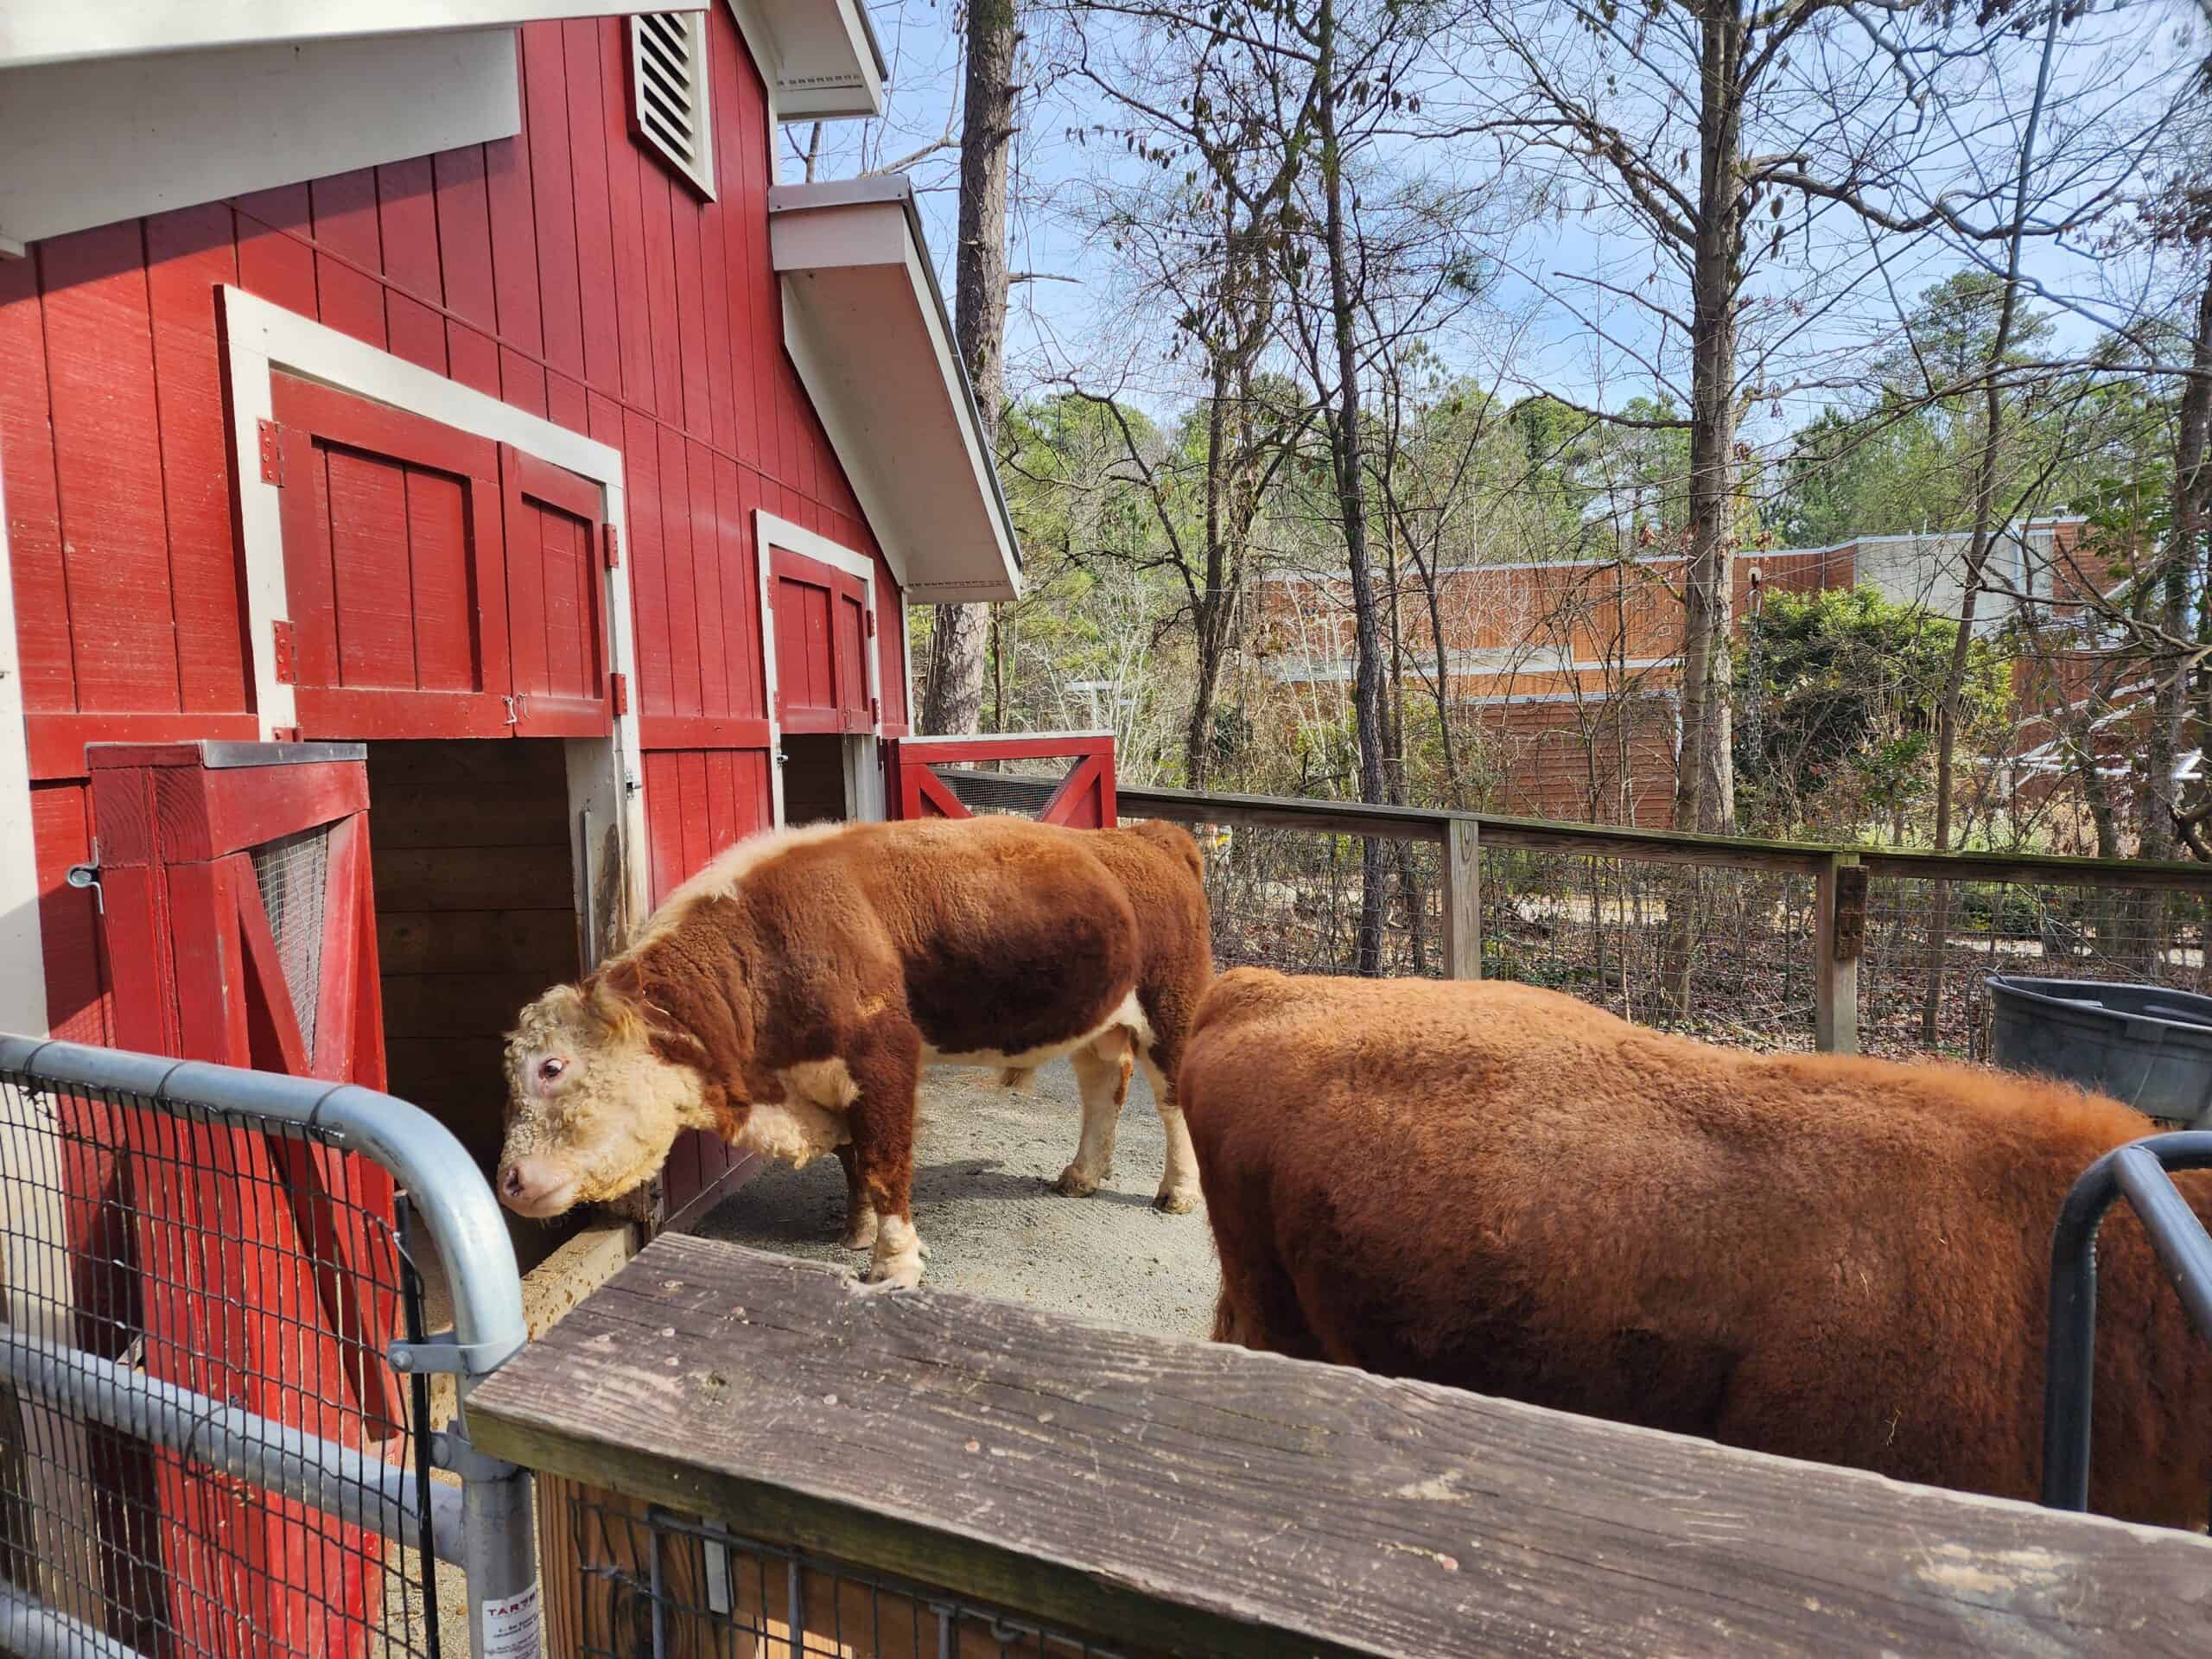 Two fluffy, brown cows stand beside a vibrant red barn within a fenced enclosure, showcasing a slice of farm life against a backdrop of leafy trees under a clear blue sky.